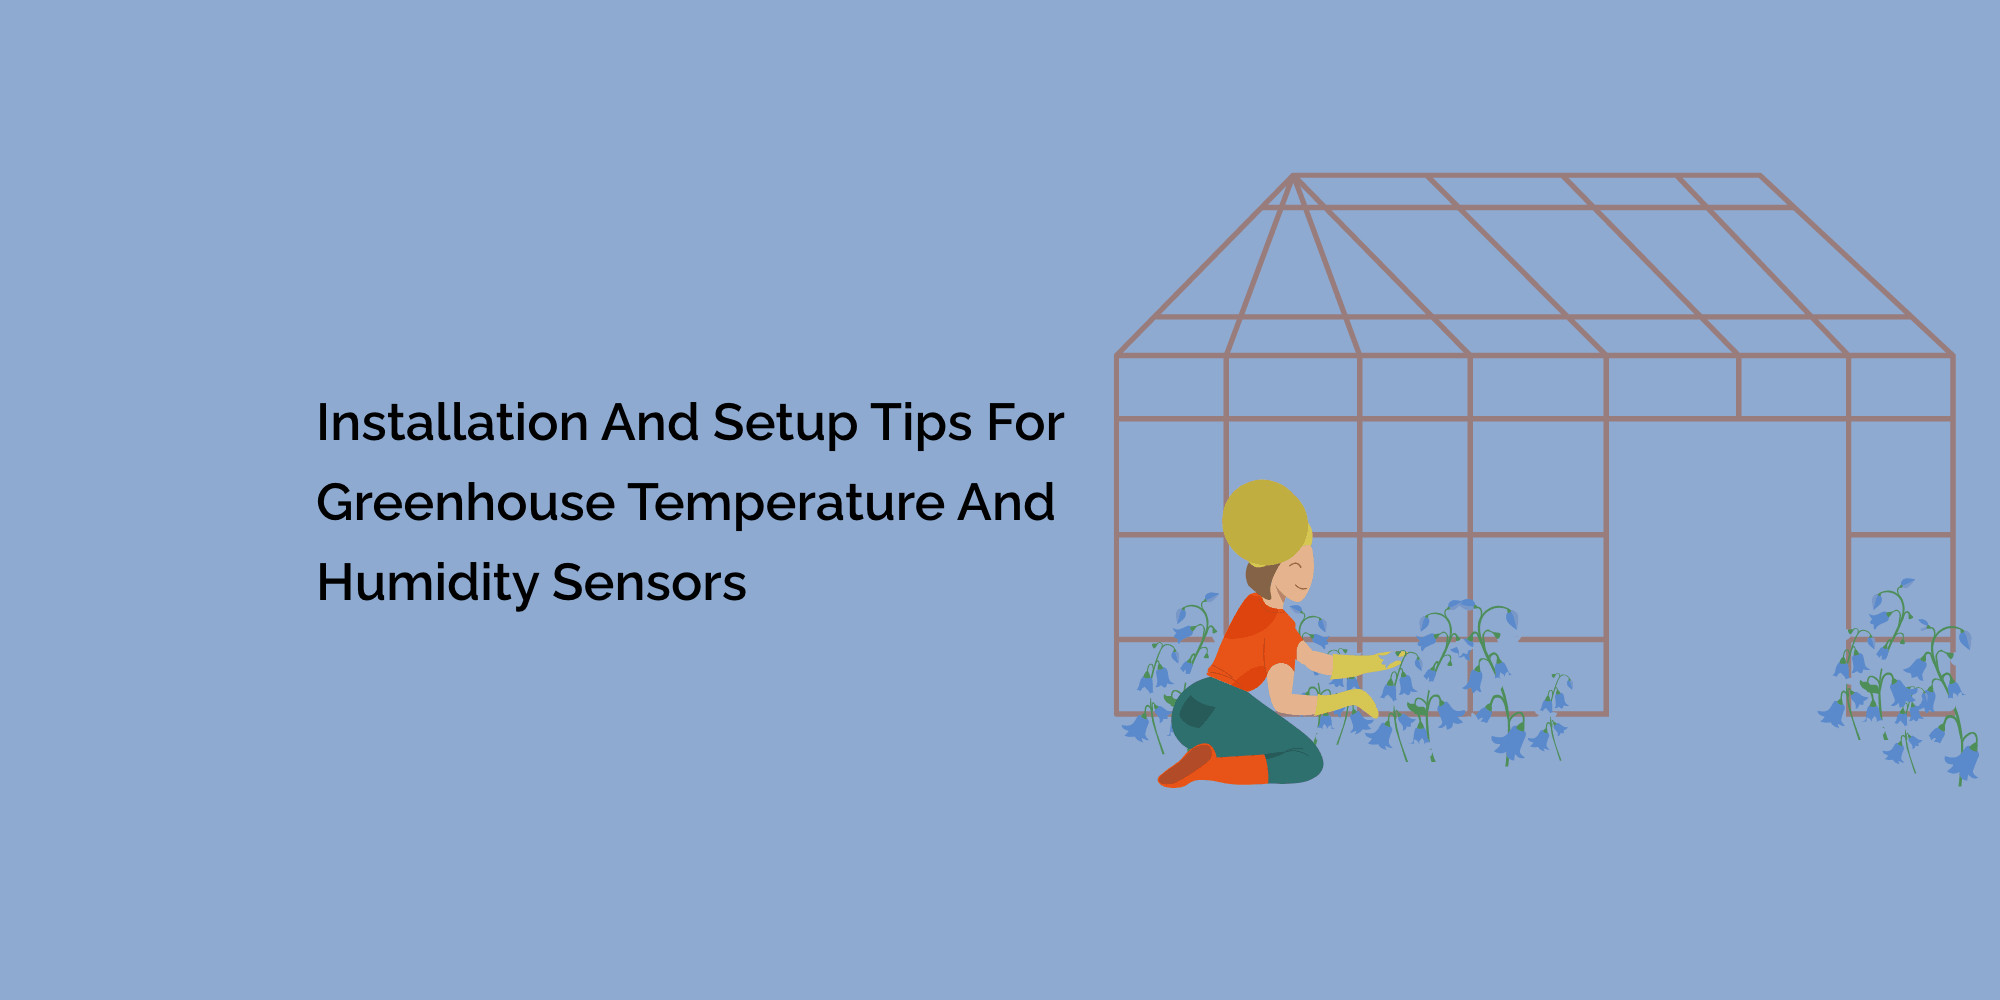 Installation and Setup Tips for Greenhouse Temperature and Humidity Sensors